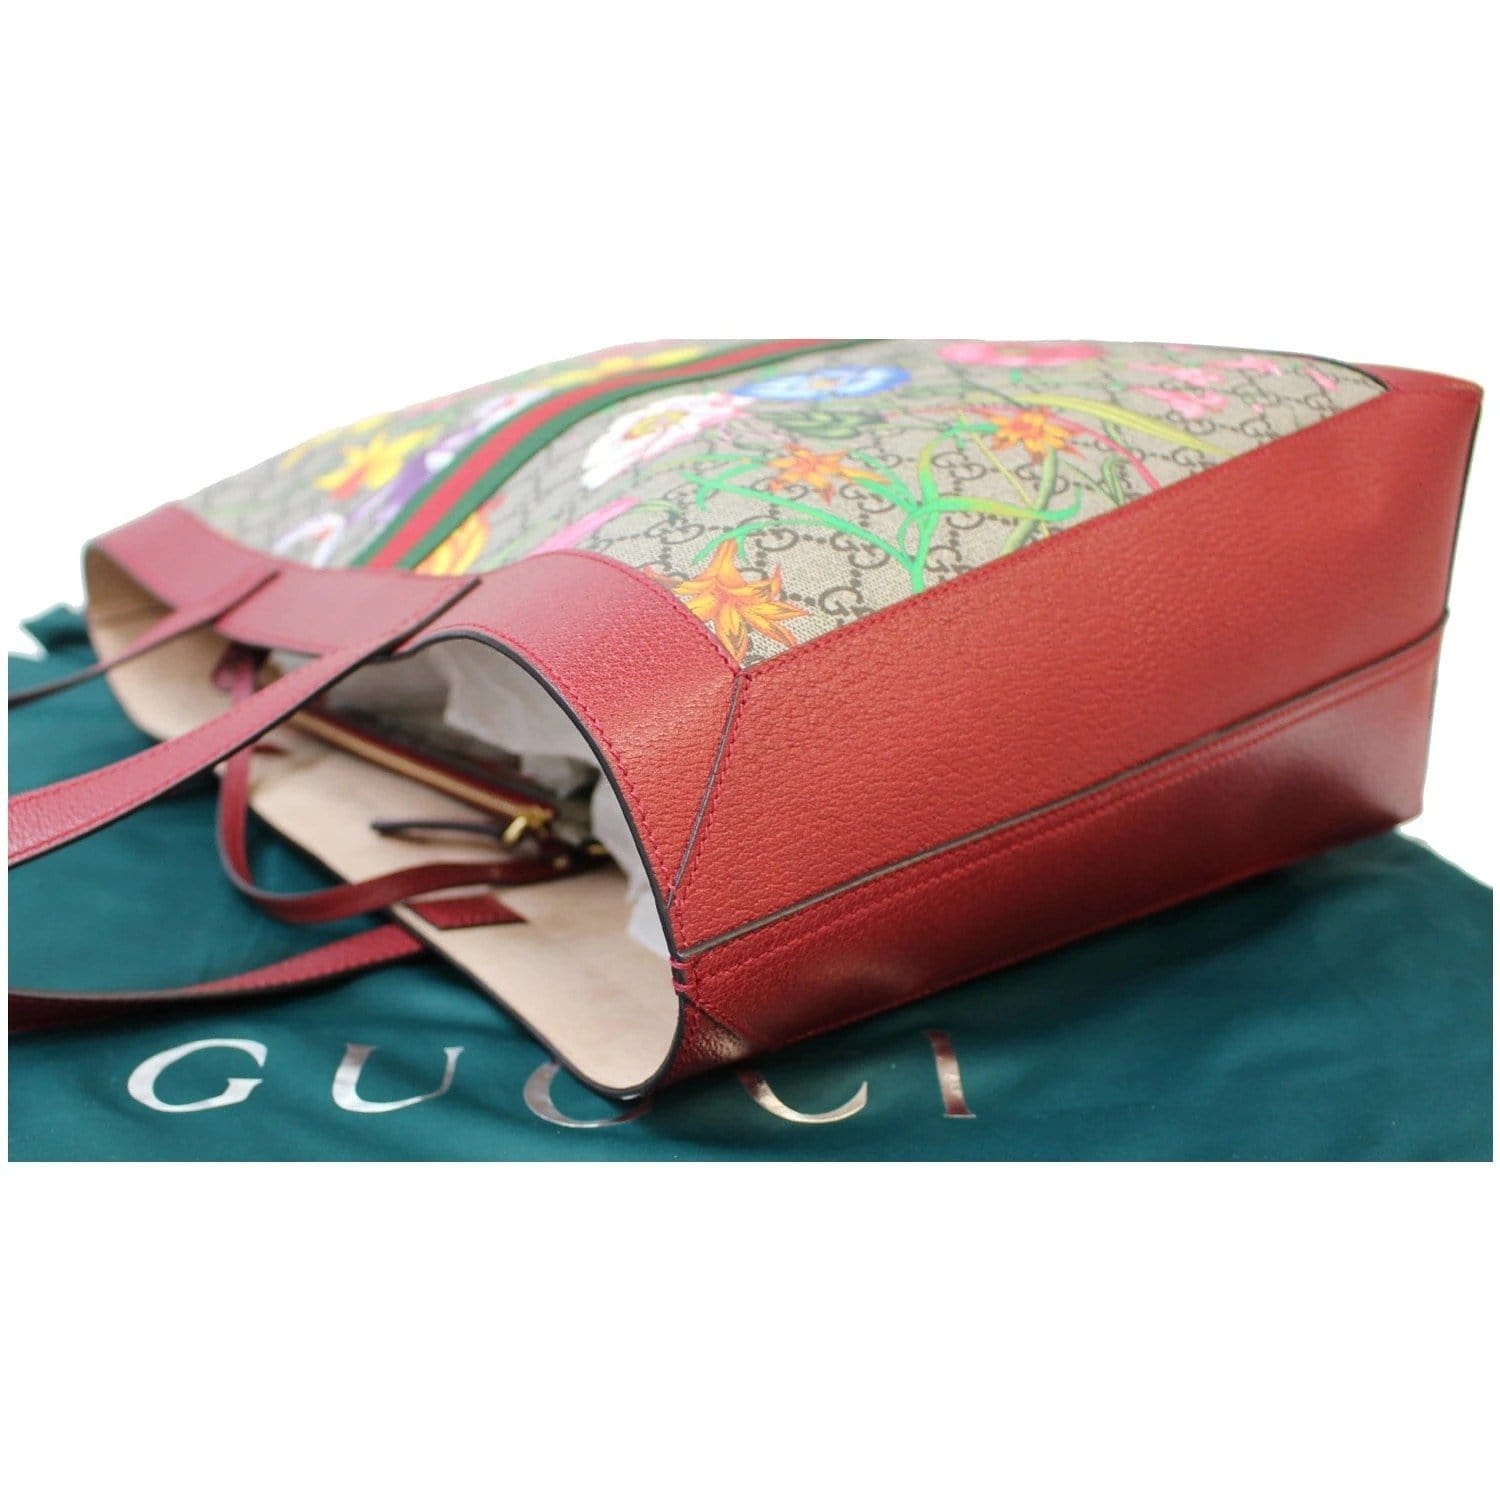 GUCCI Ophidia GG Flora Medium Tote Bag Red 547947-US